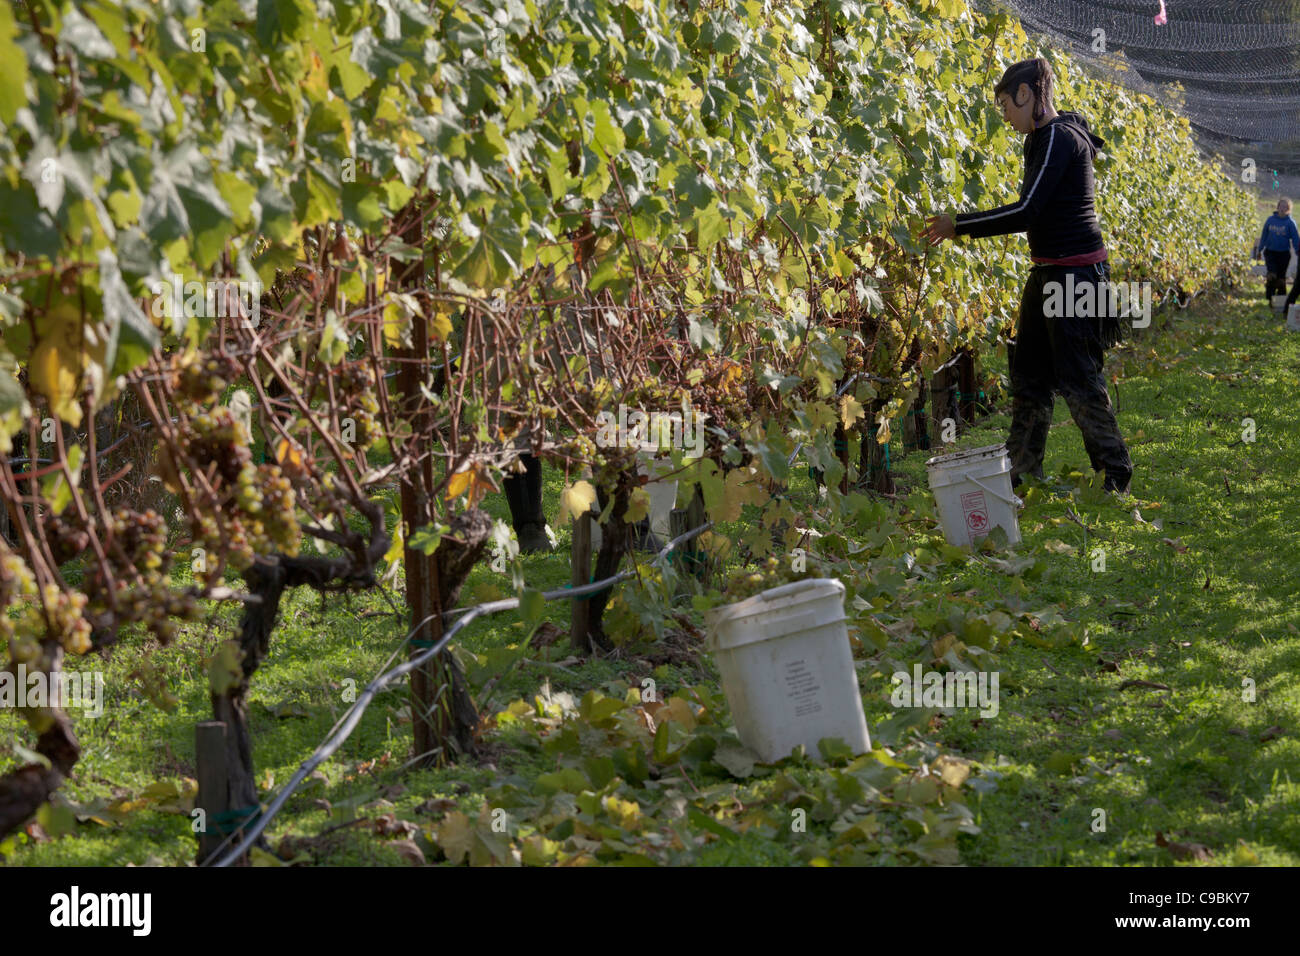 Young woman harvesting Madeleine Angevine grapes. Stock Photo